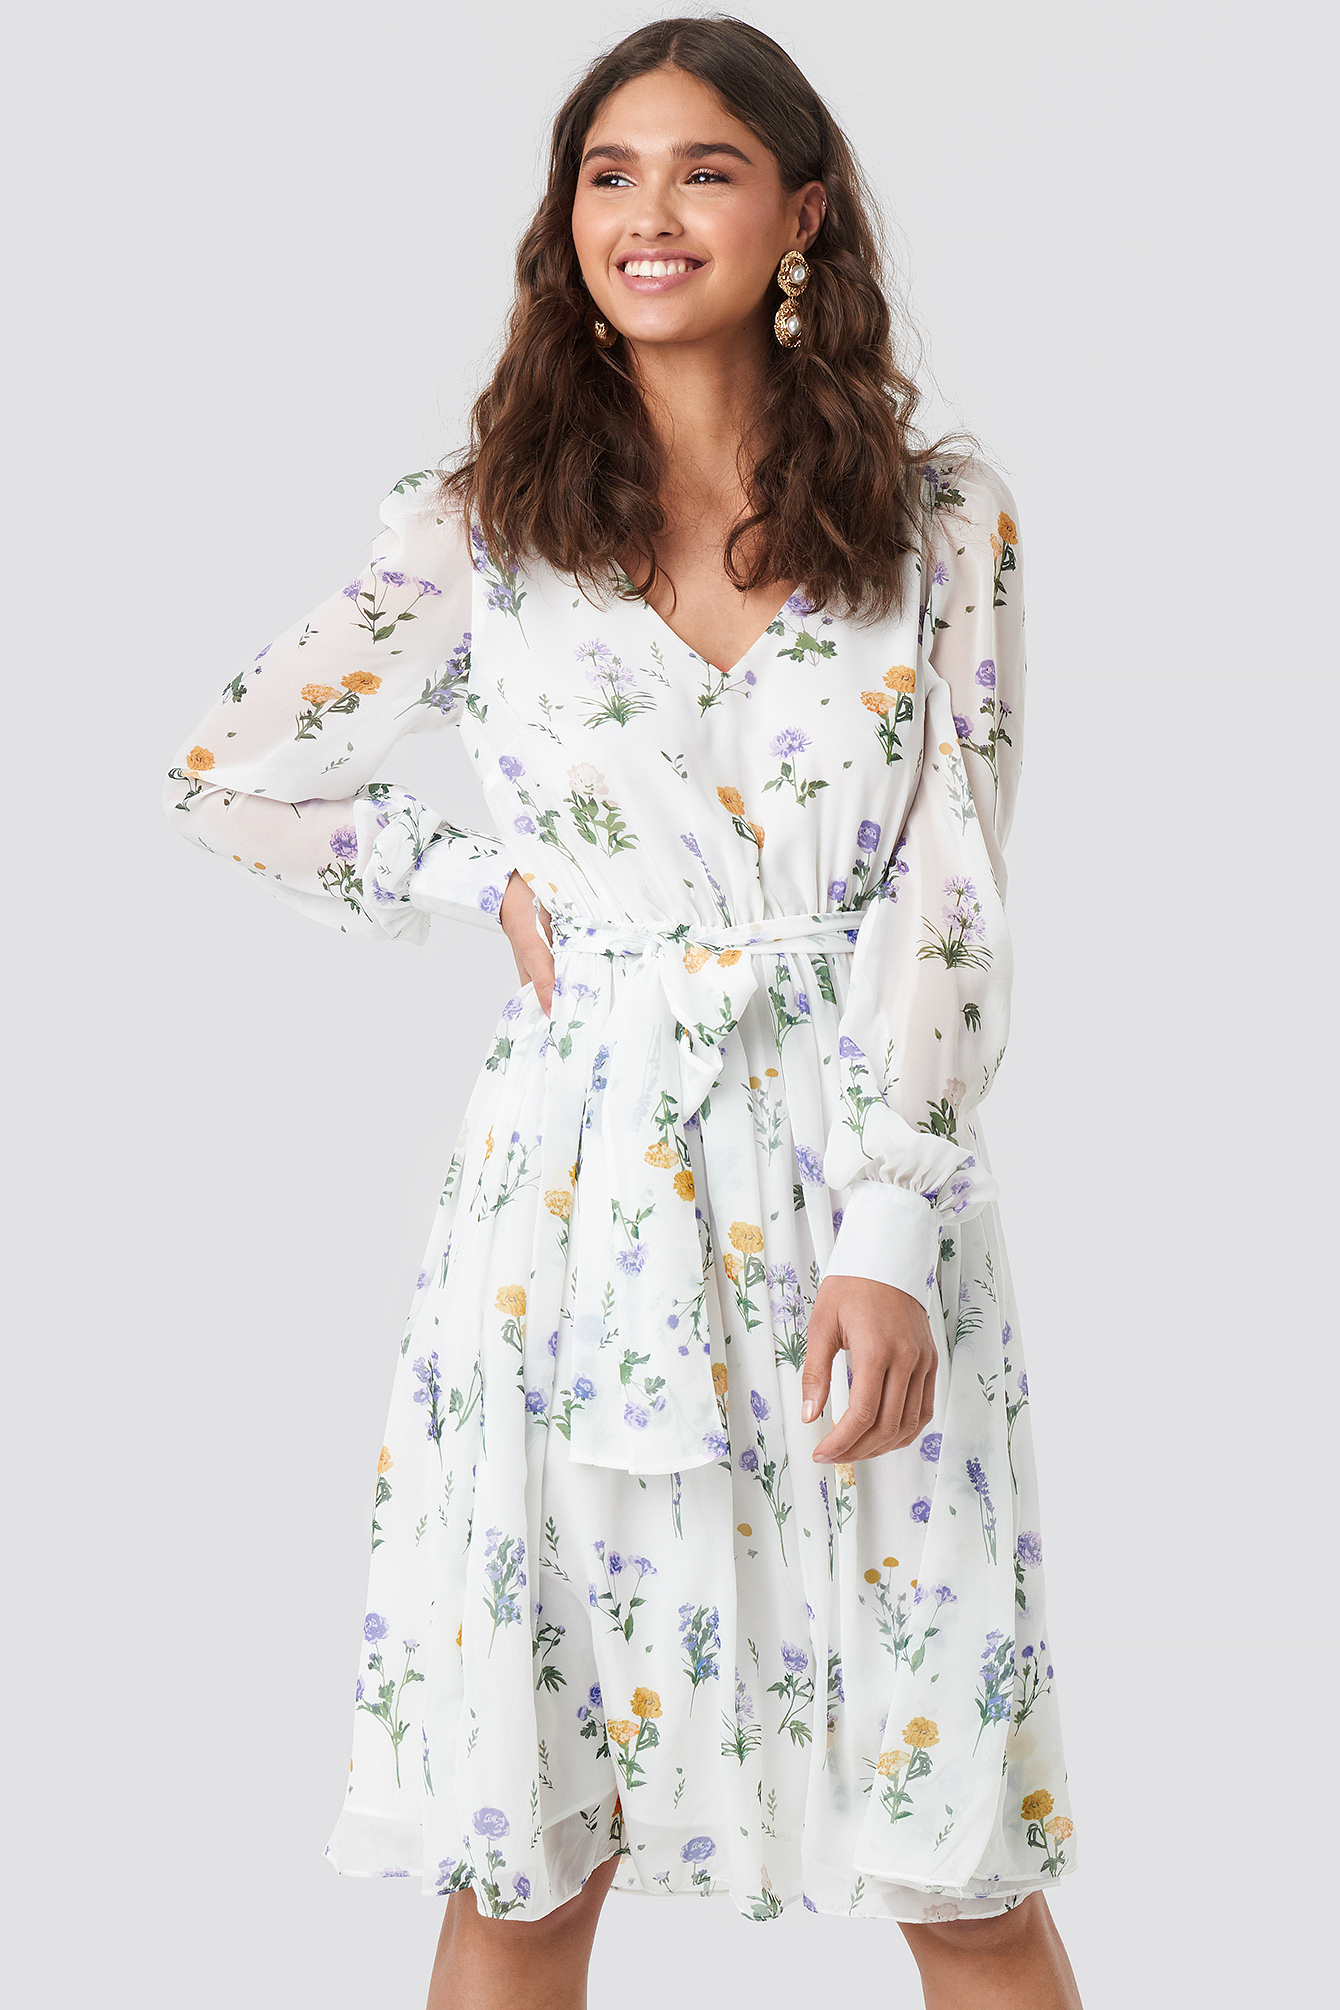 puffy floral dress